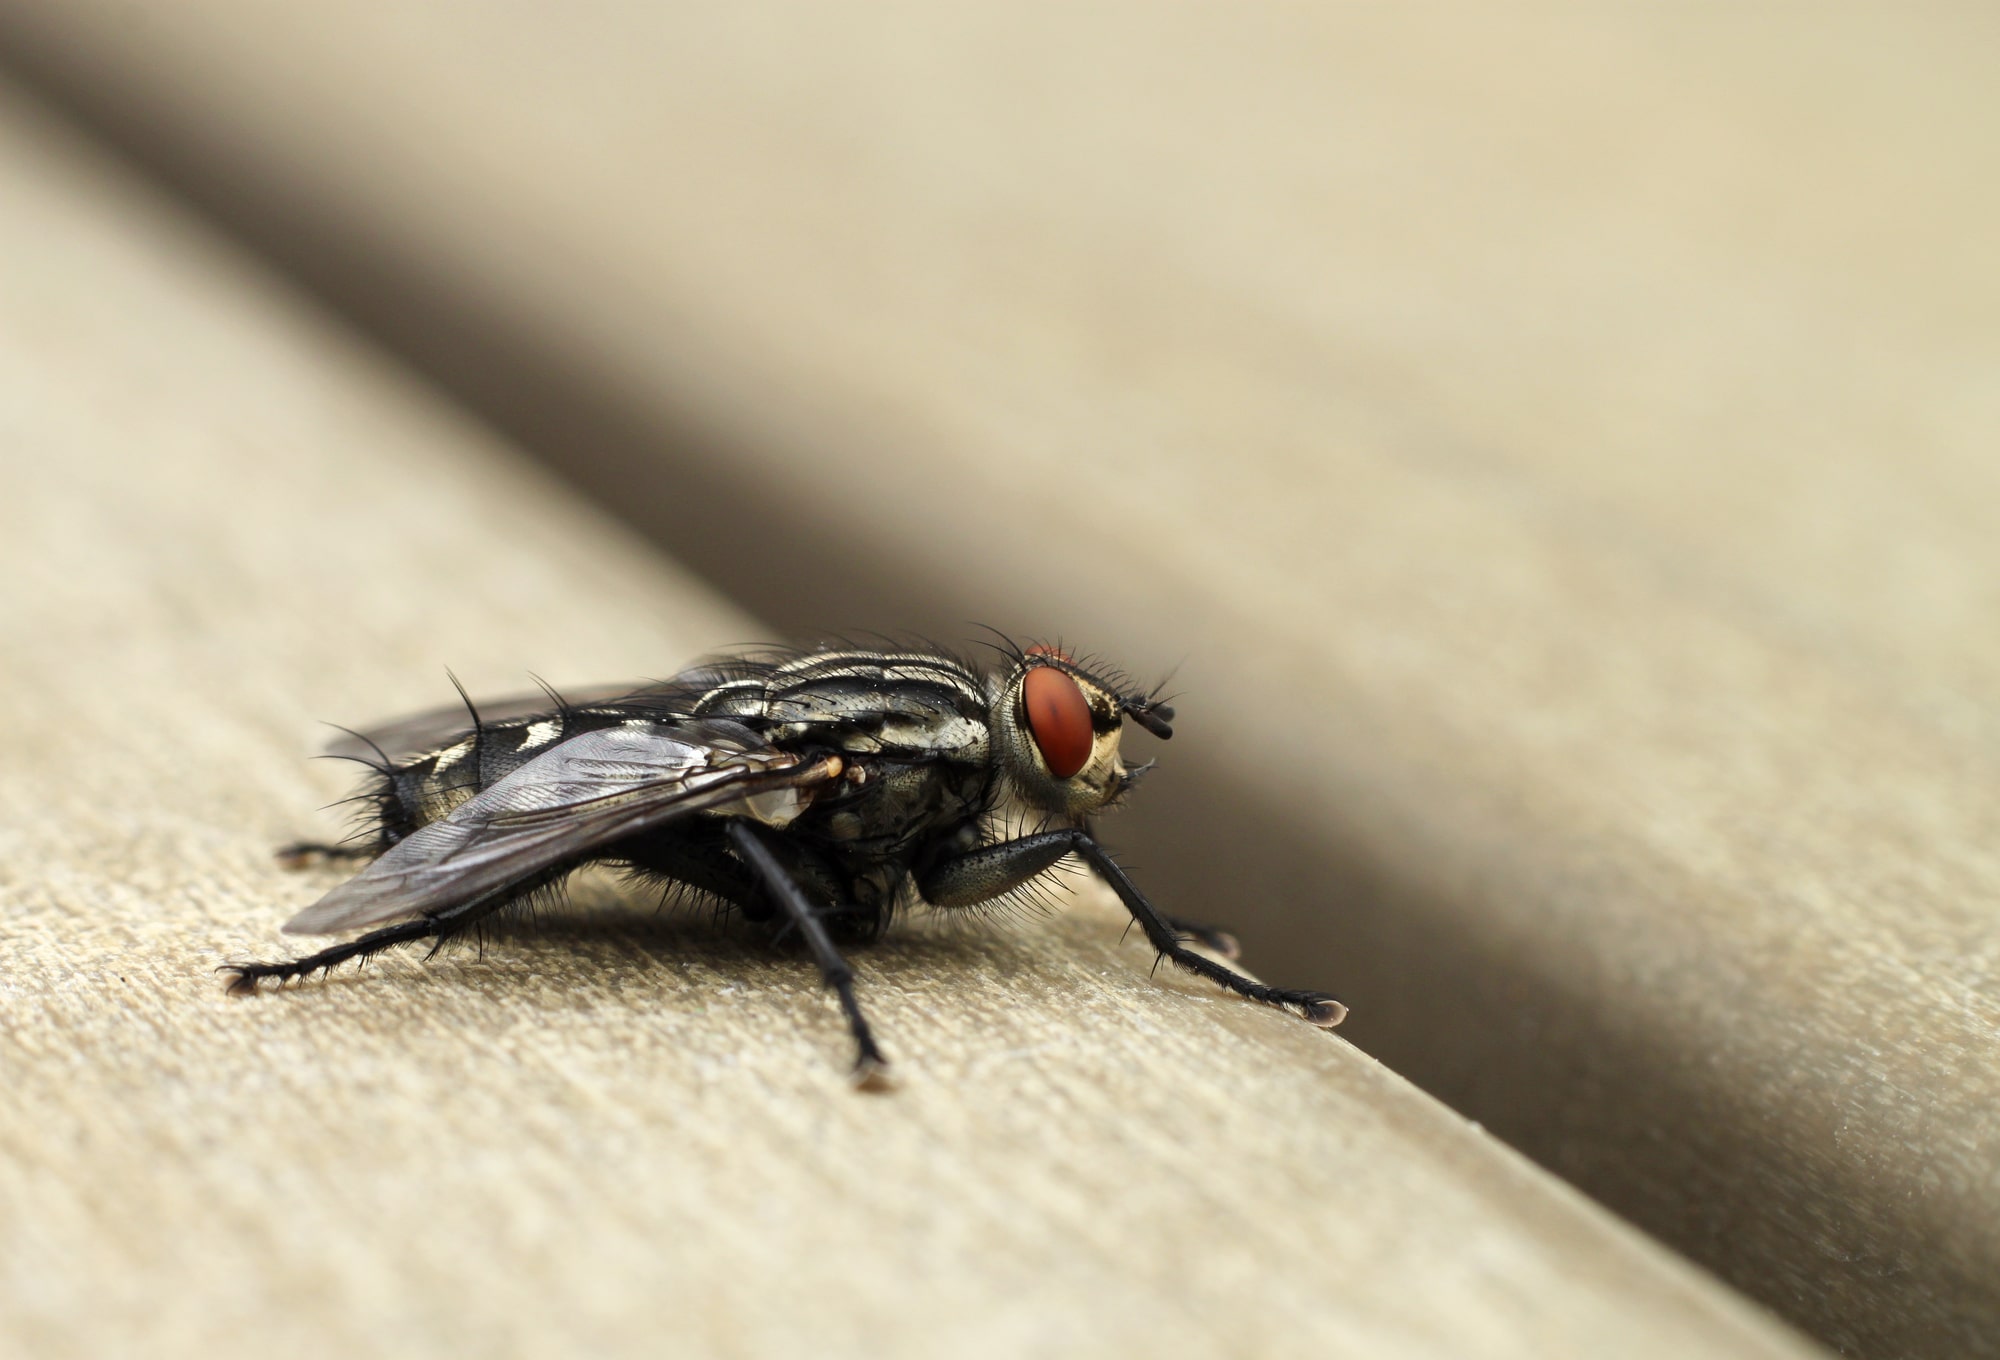 What's the difference between house flies and cluster flies